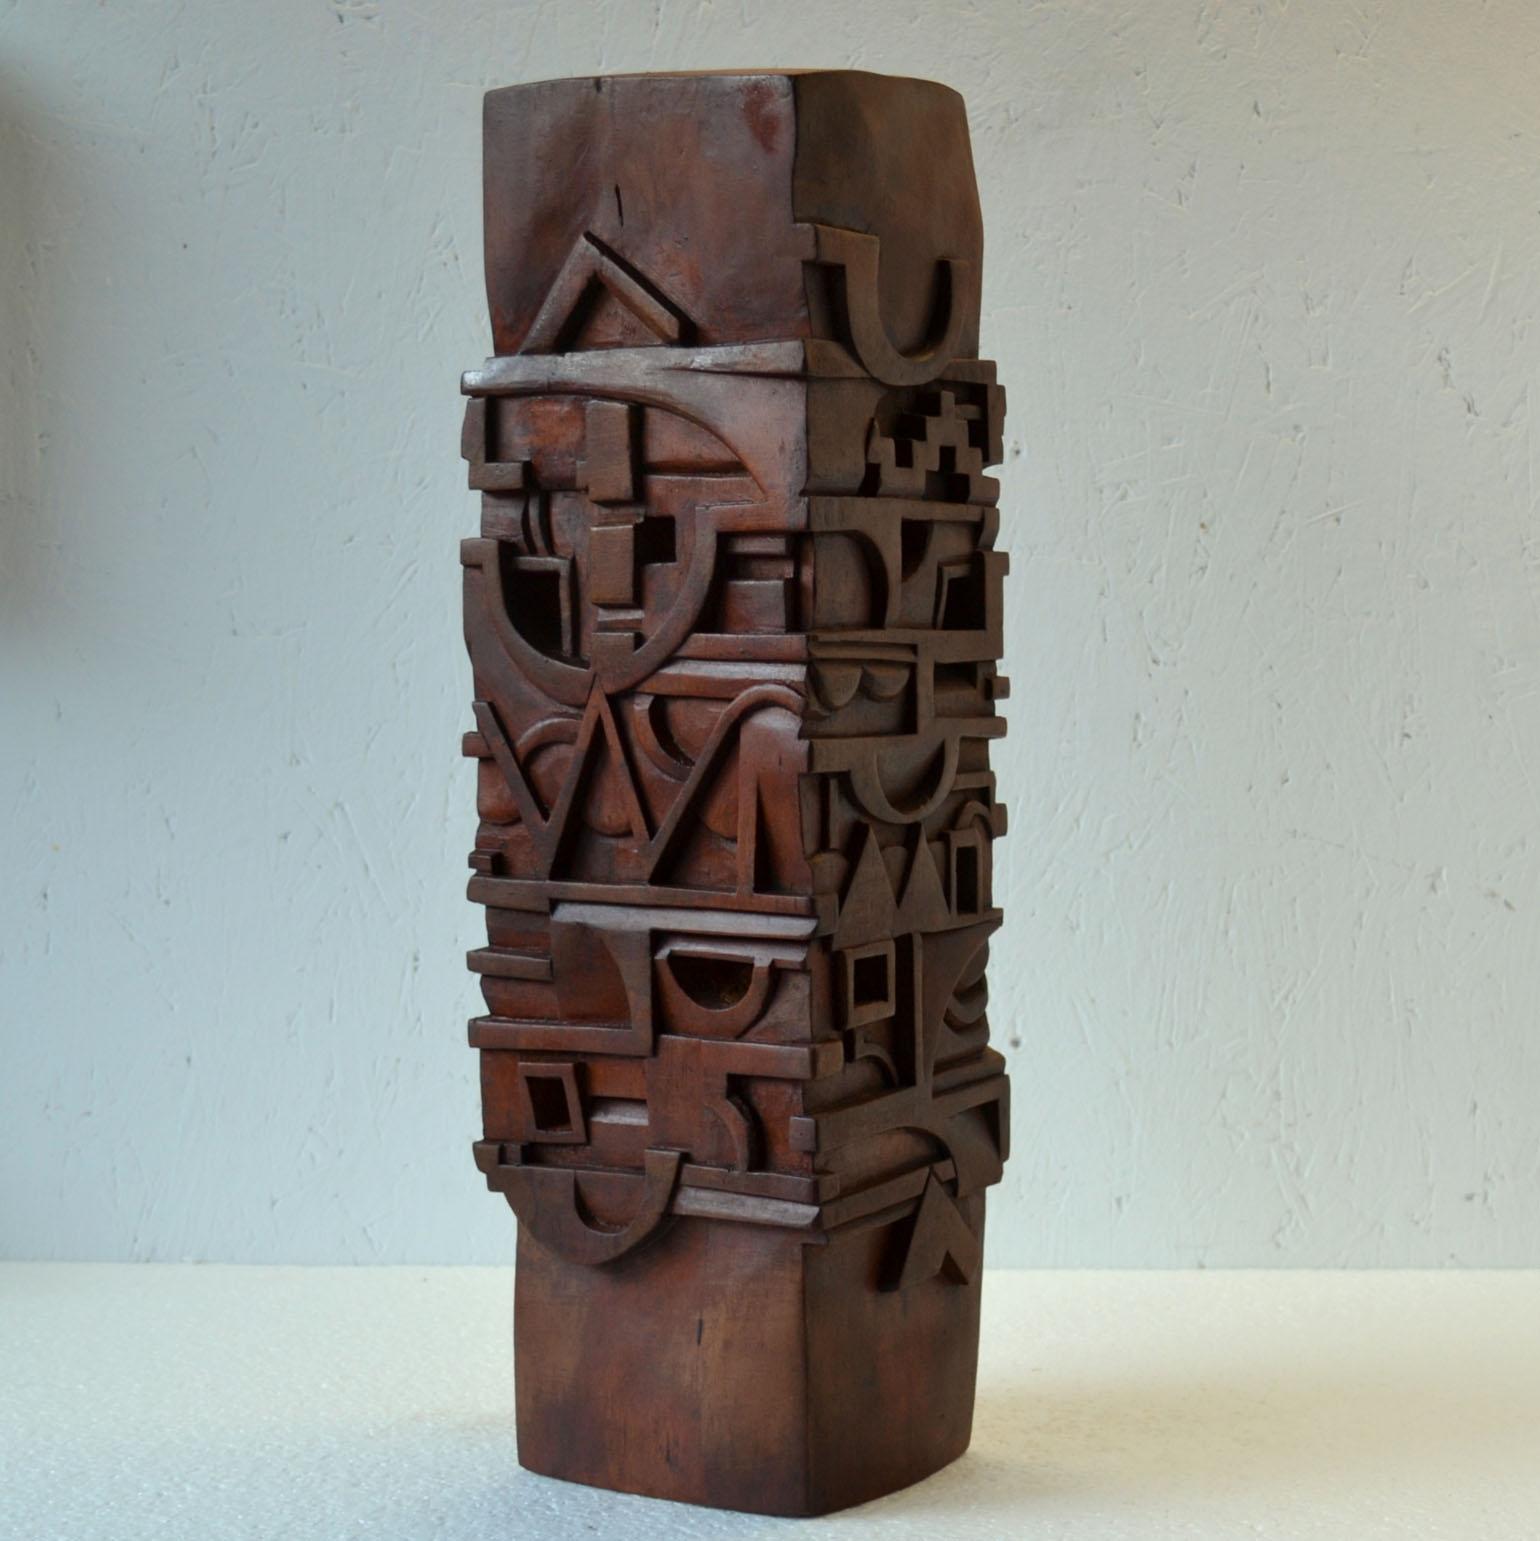 Rectangular abstract totem sculpture carved with letters and symbols and stained in red-brown hard wood, by T. Sabri, France 1987.
The Totem is a tower that communicates through a visual language of symbols, pictures, objects, letters and words.